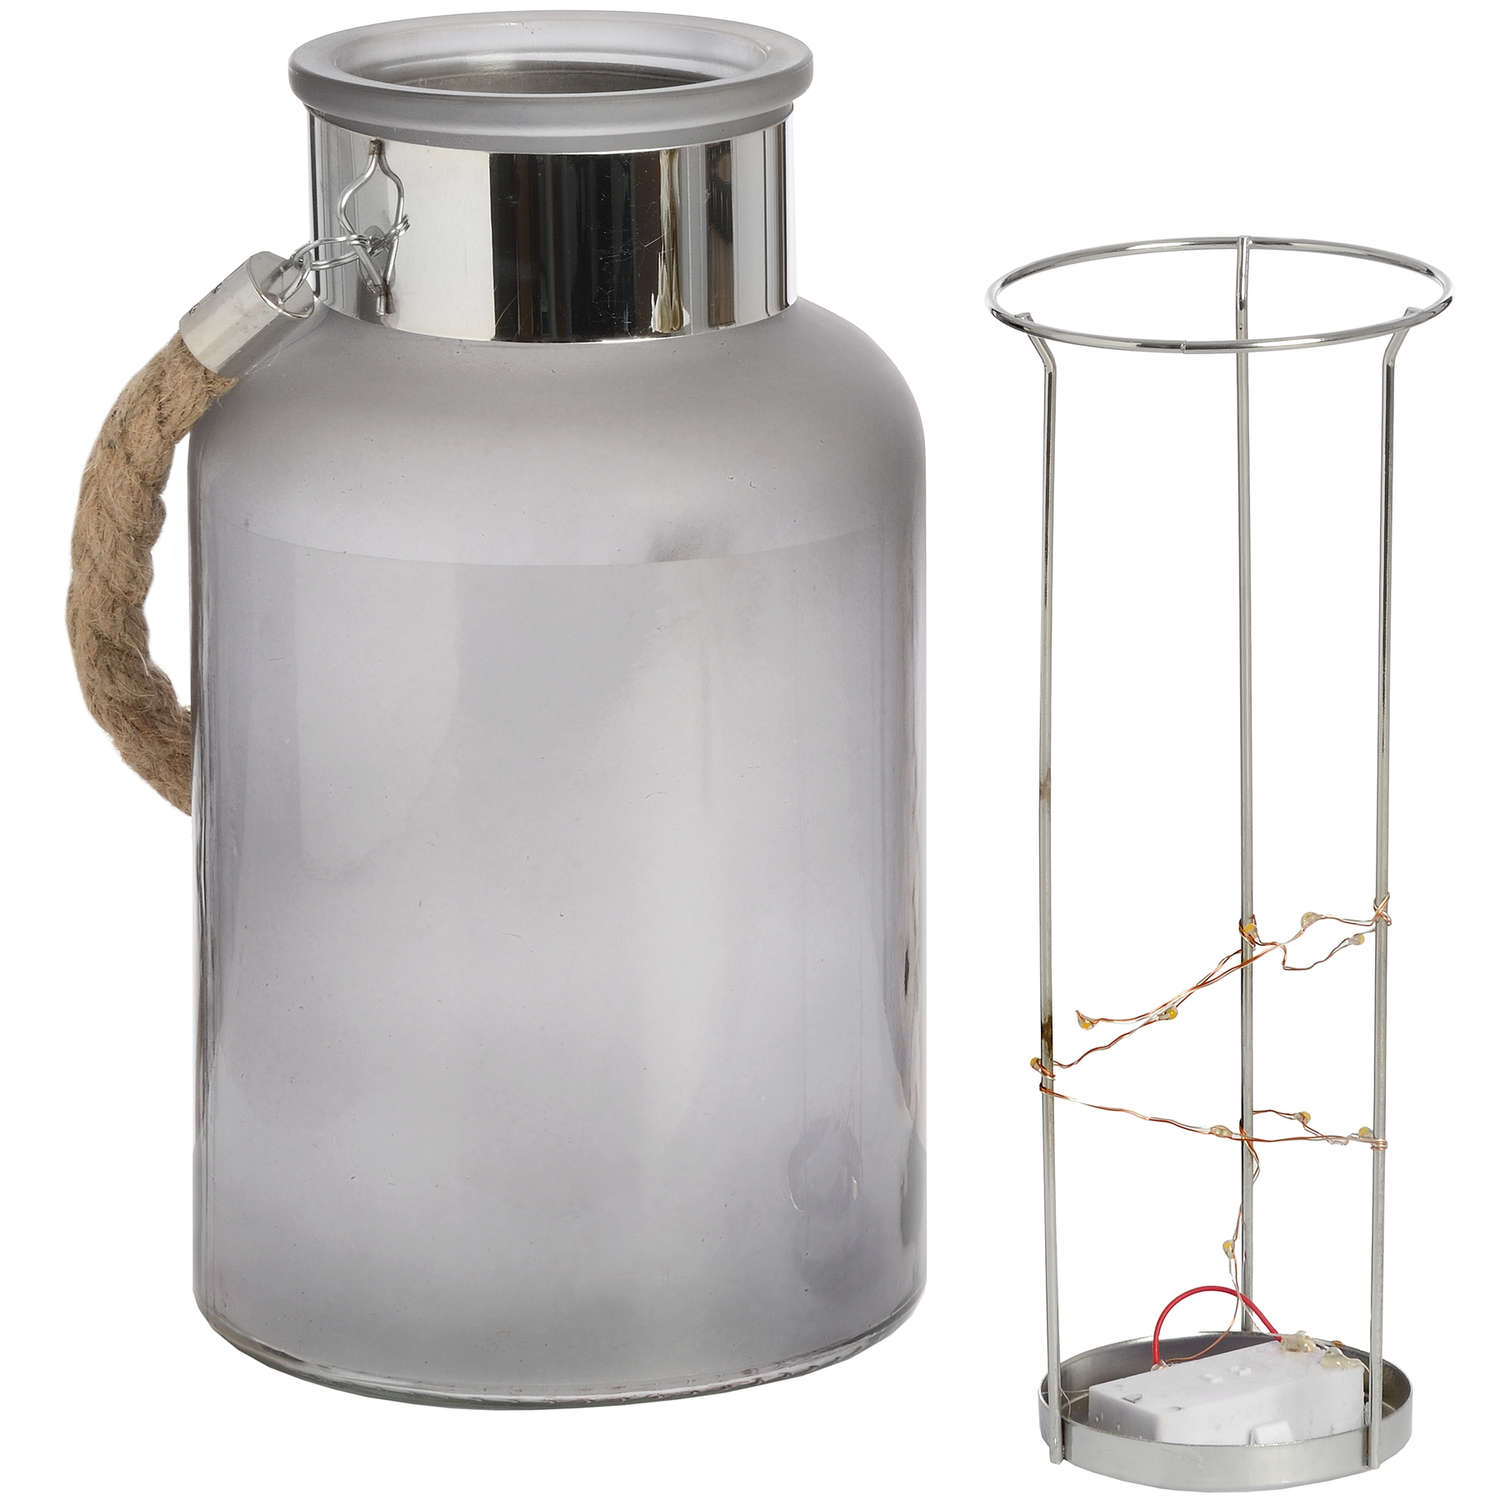 Frosted Glass Lantern with Rope Detail and Interior LED